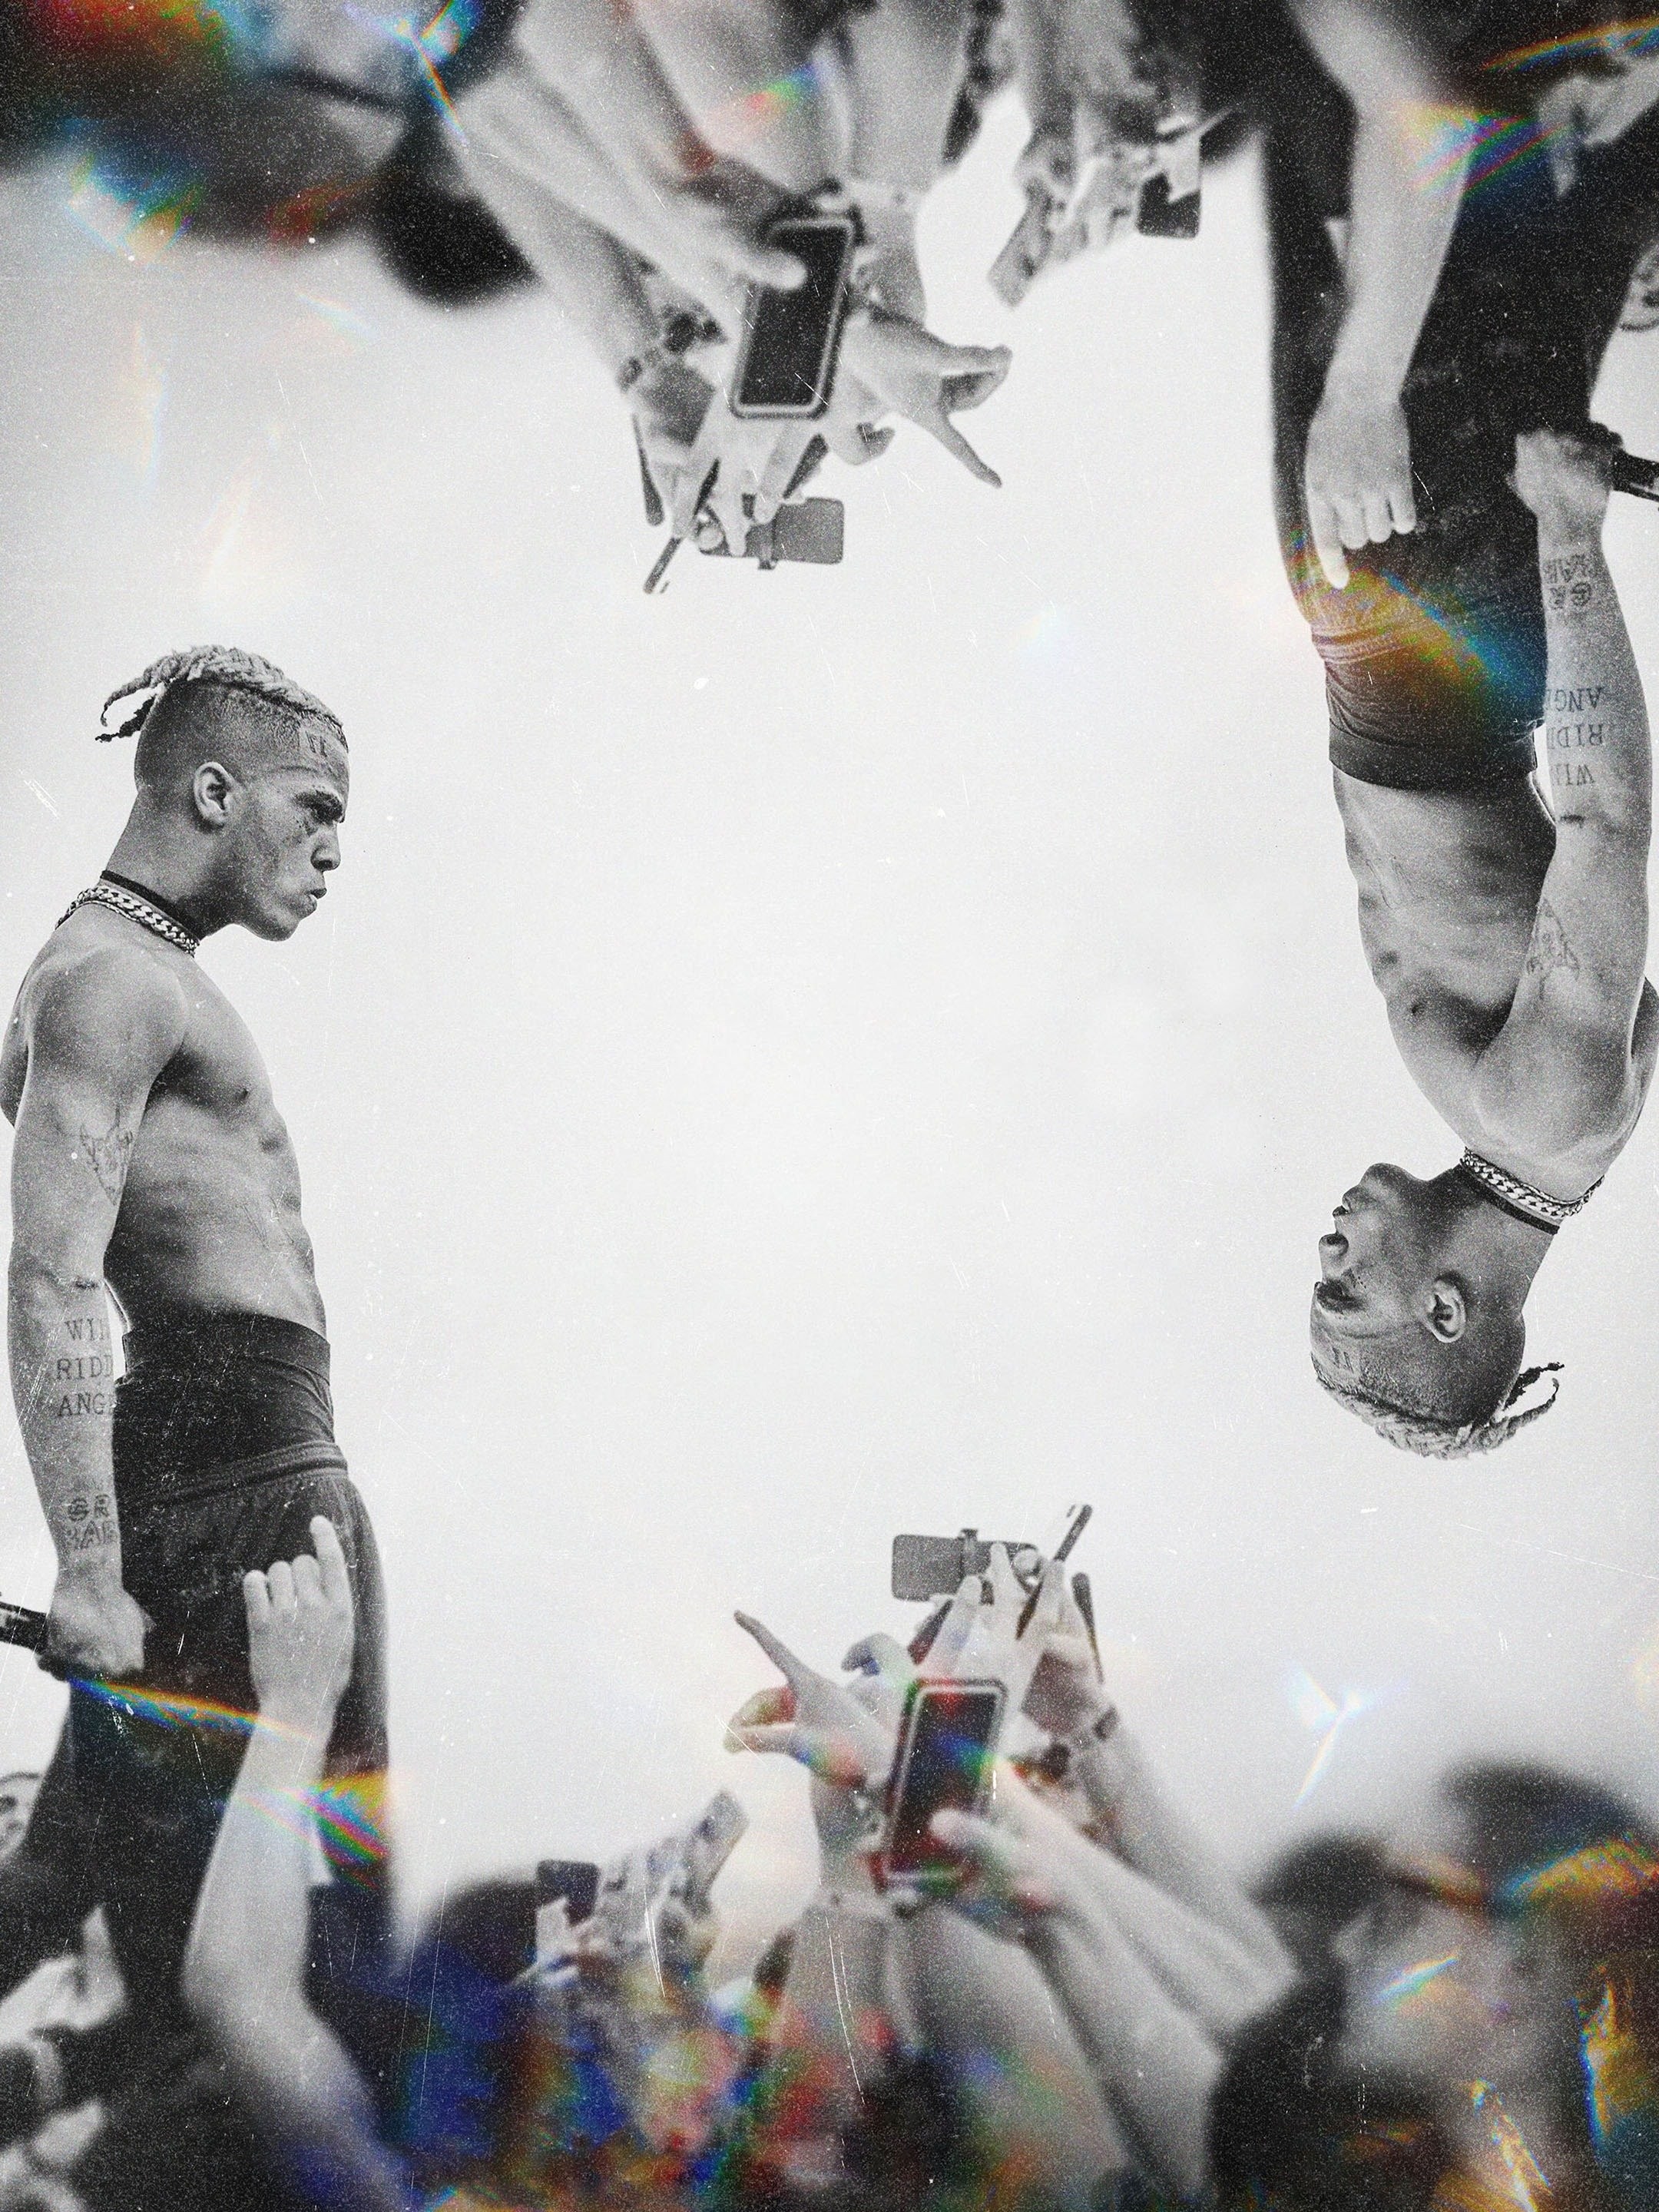 Look at Me: XXXTENTACION' develops an incomplete picture of a troubled life